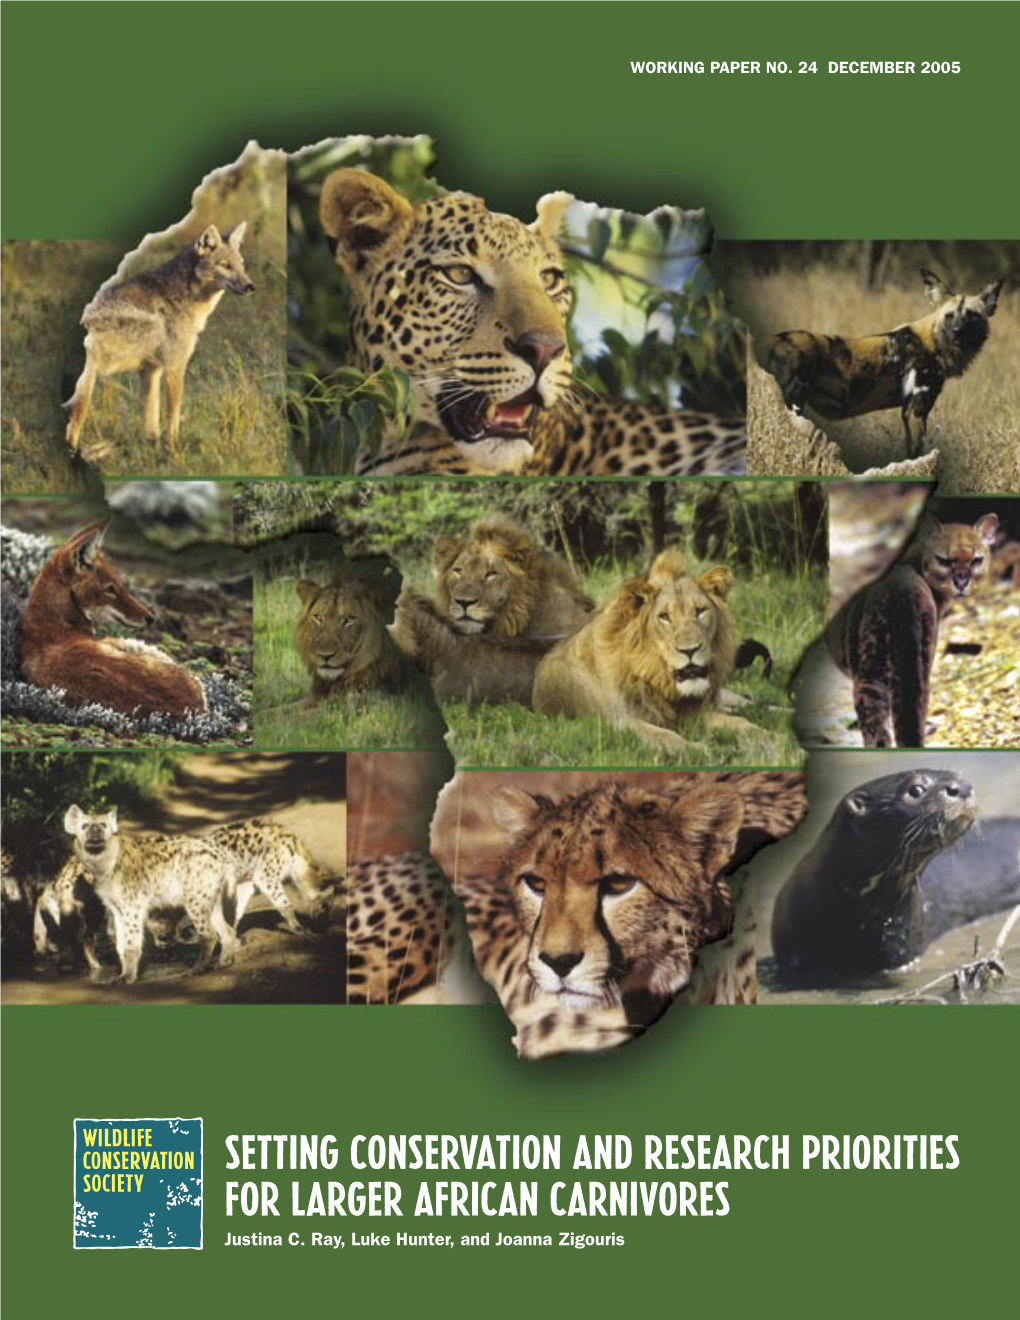 SETTING CONSERVATION and RESEARCH PRIORITIES for LARGER AFRICAN CARNIVORES Justina C